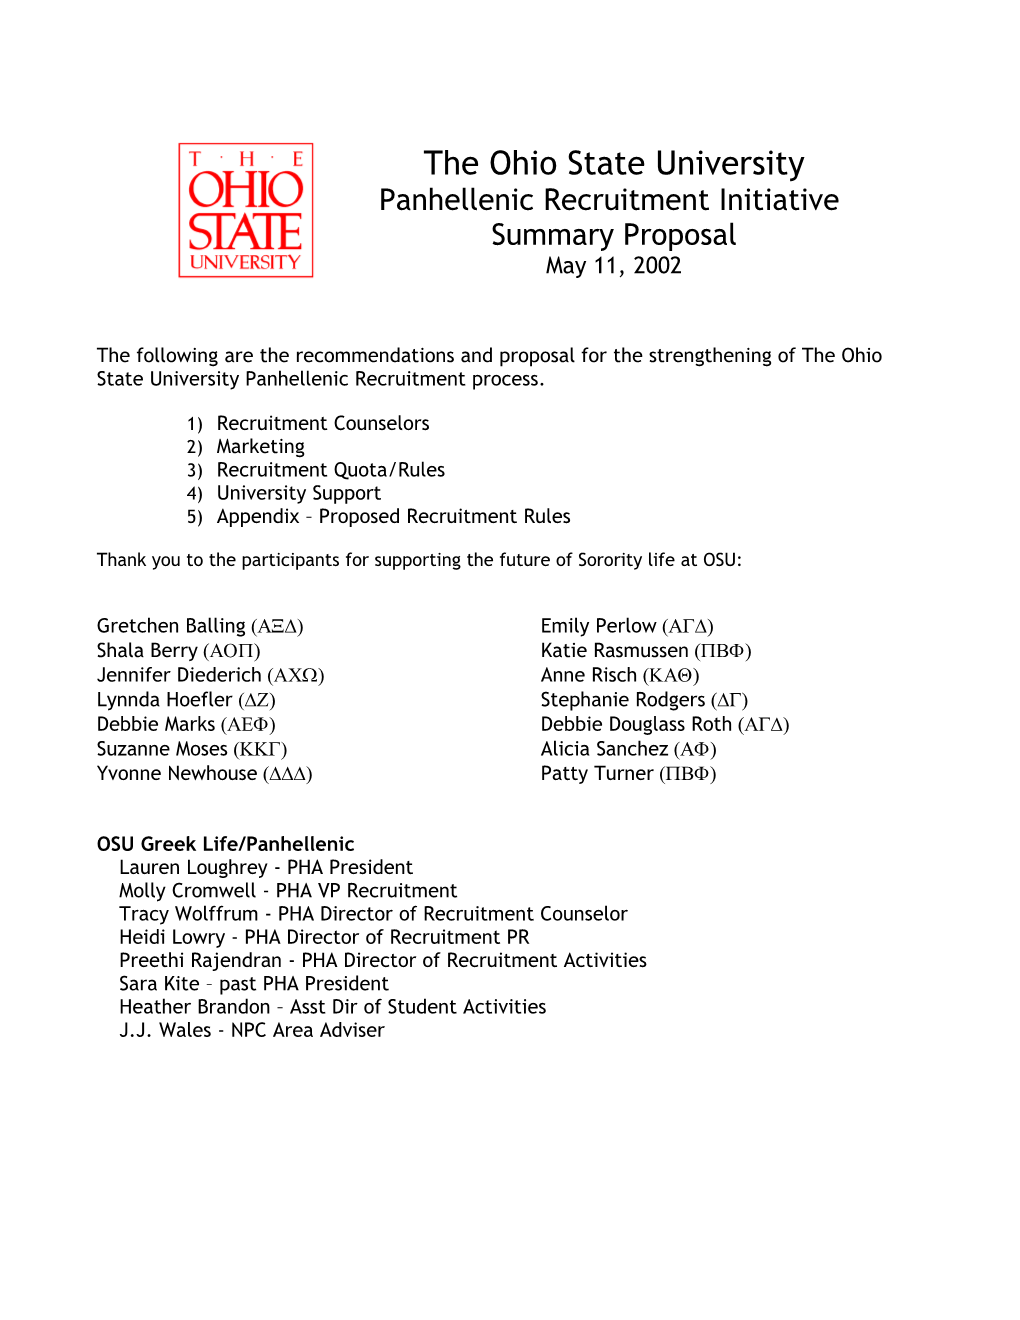 The Following Are the Recommendations and Proposal for the Strengthening of the Ohio State